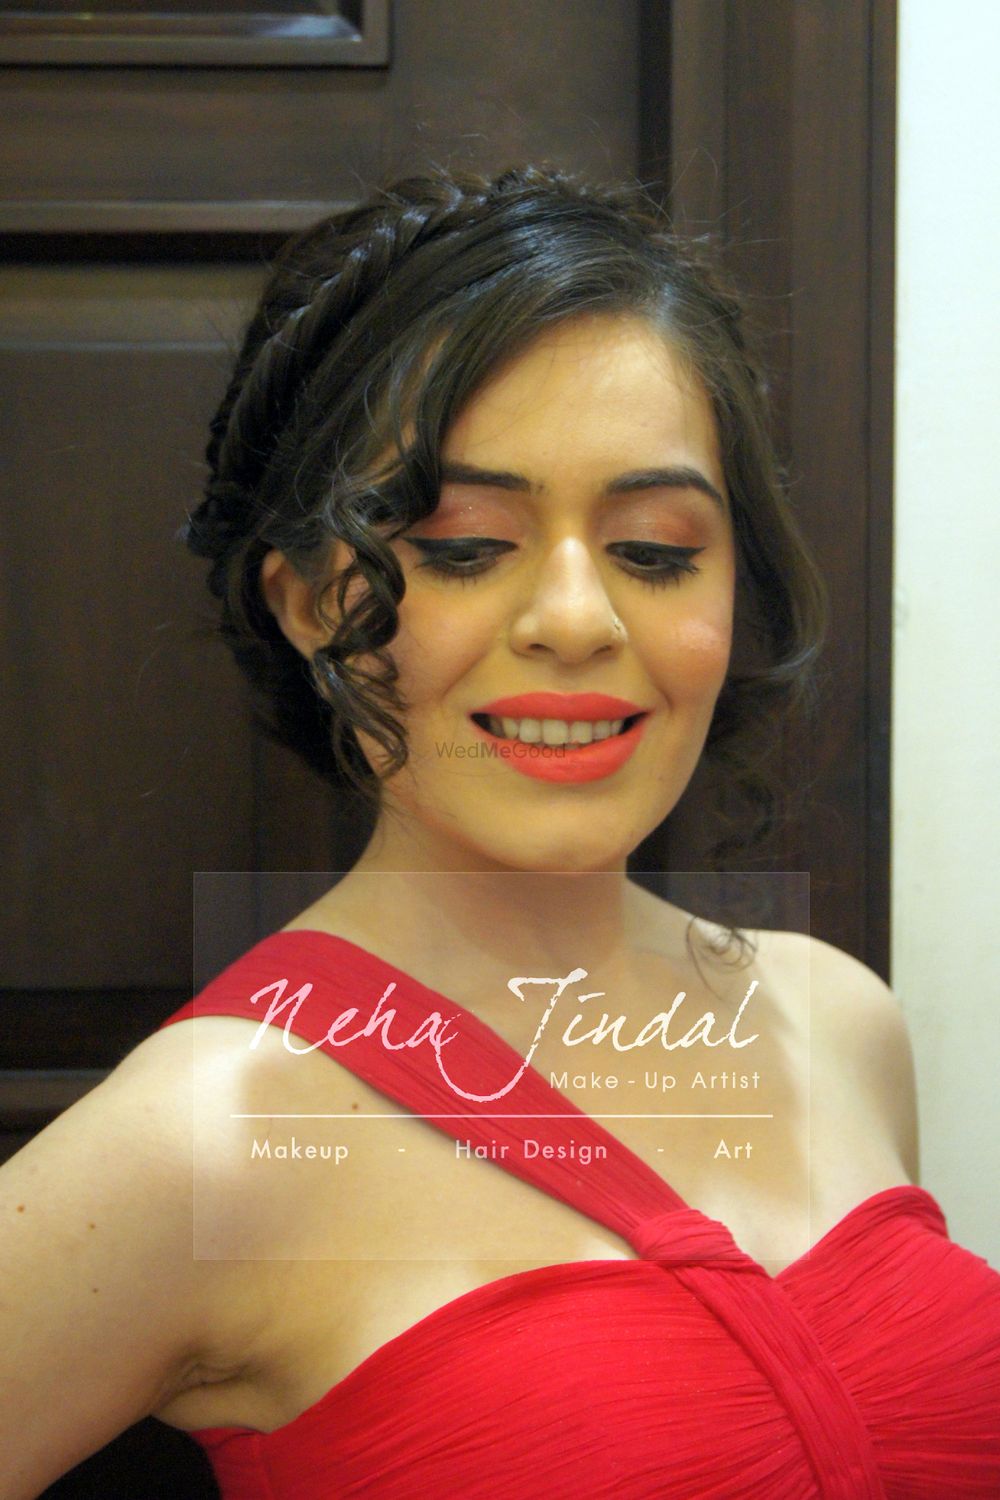 Photo From LAFIESTA MAGAZINE COVER PAGE SHOOT - By Neha Jindal Makeup Artist